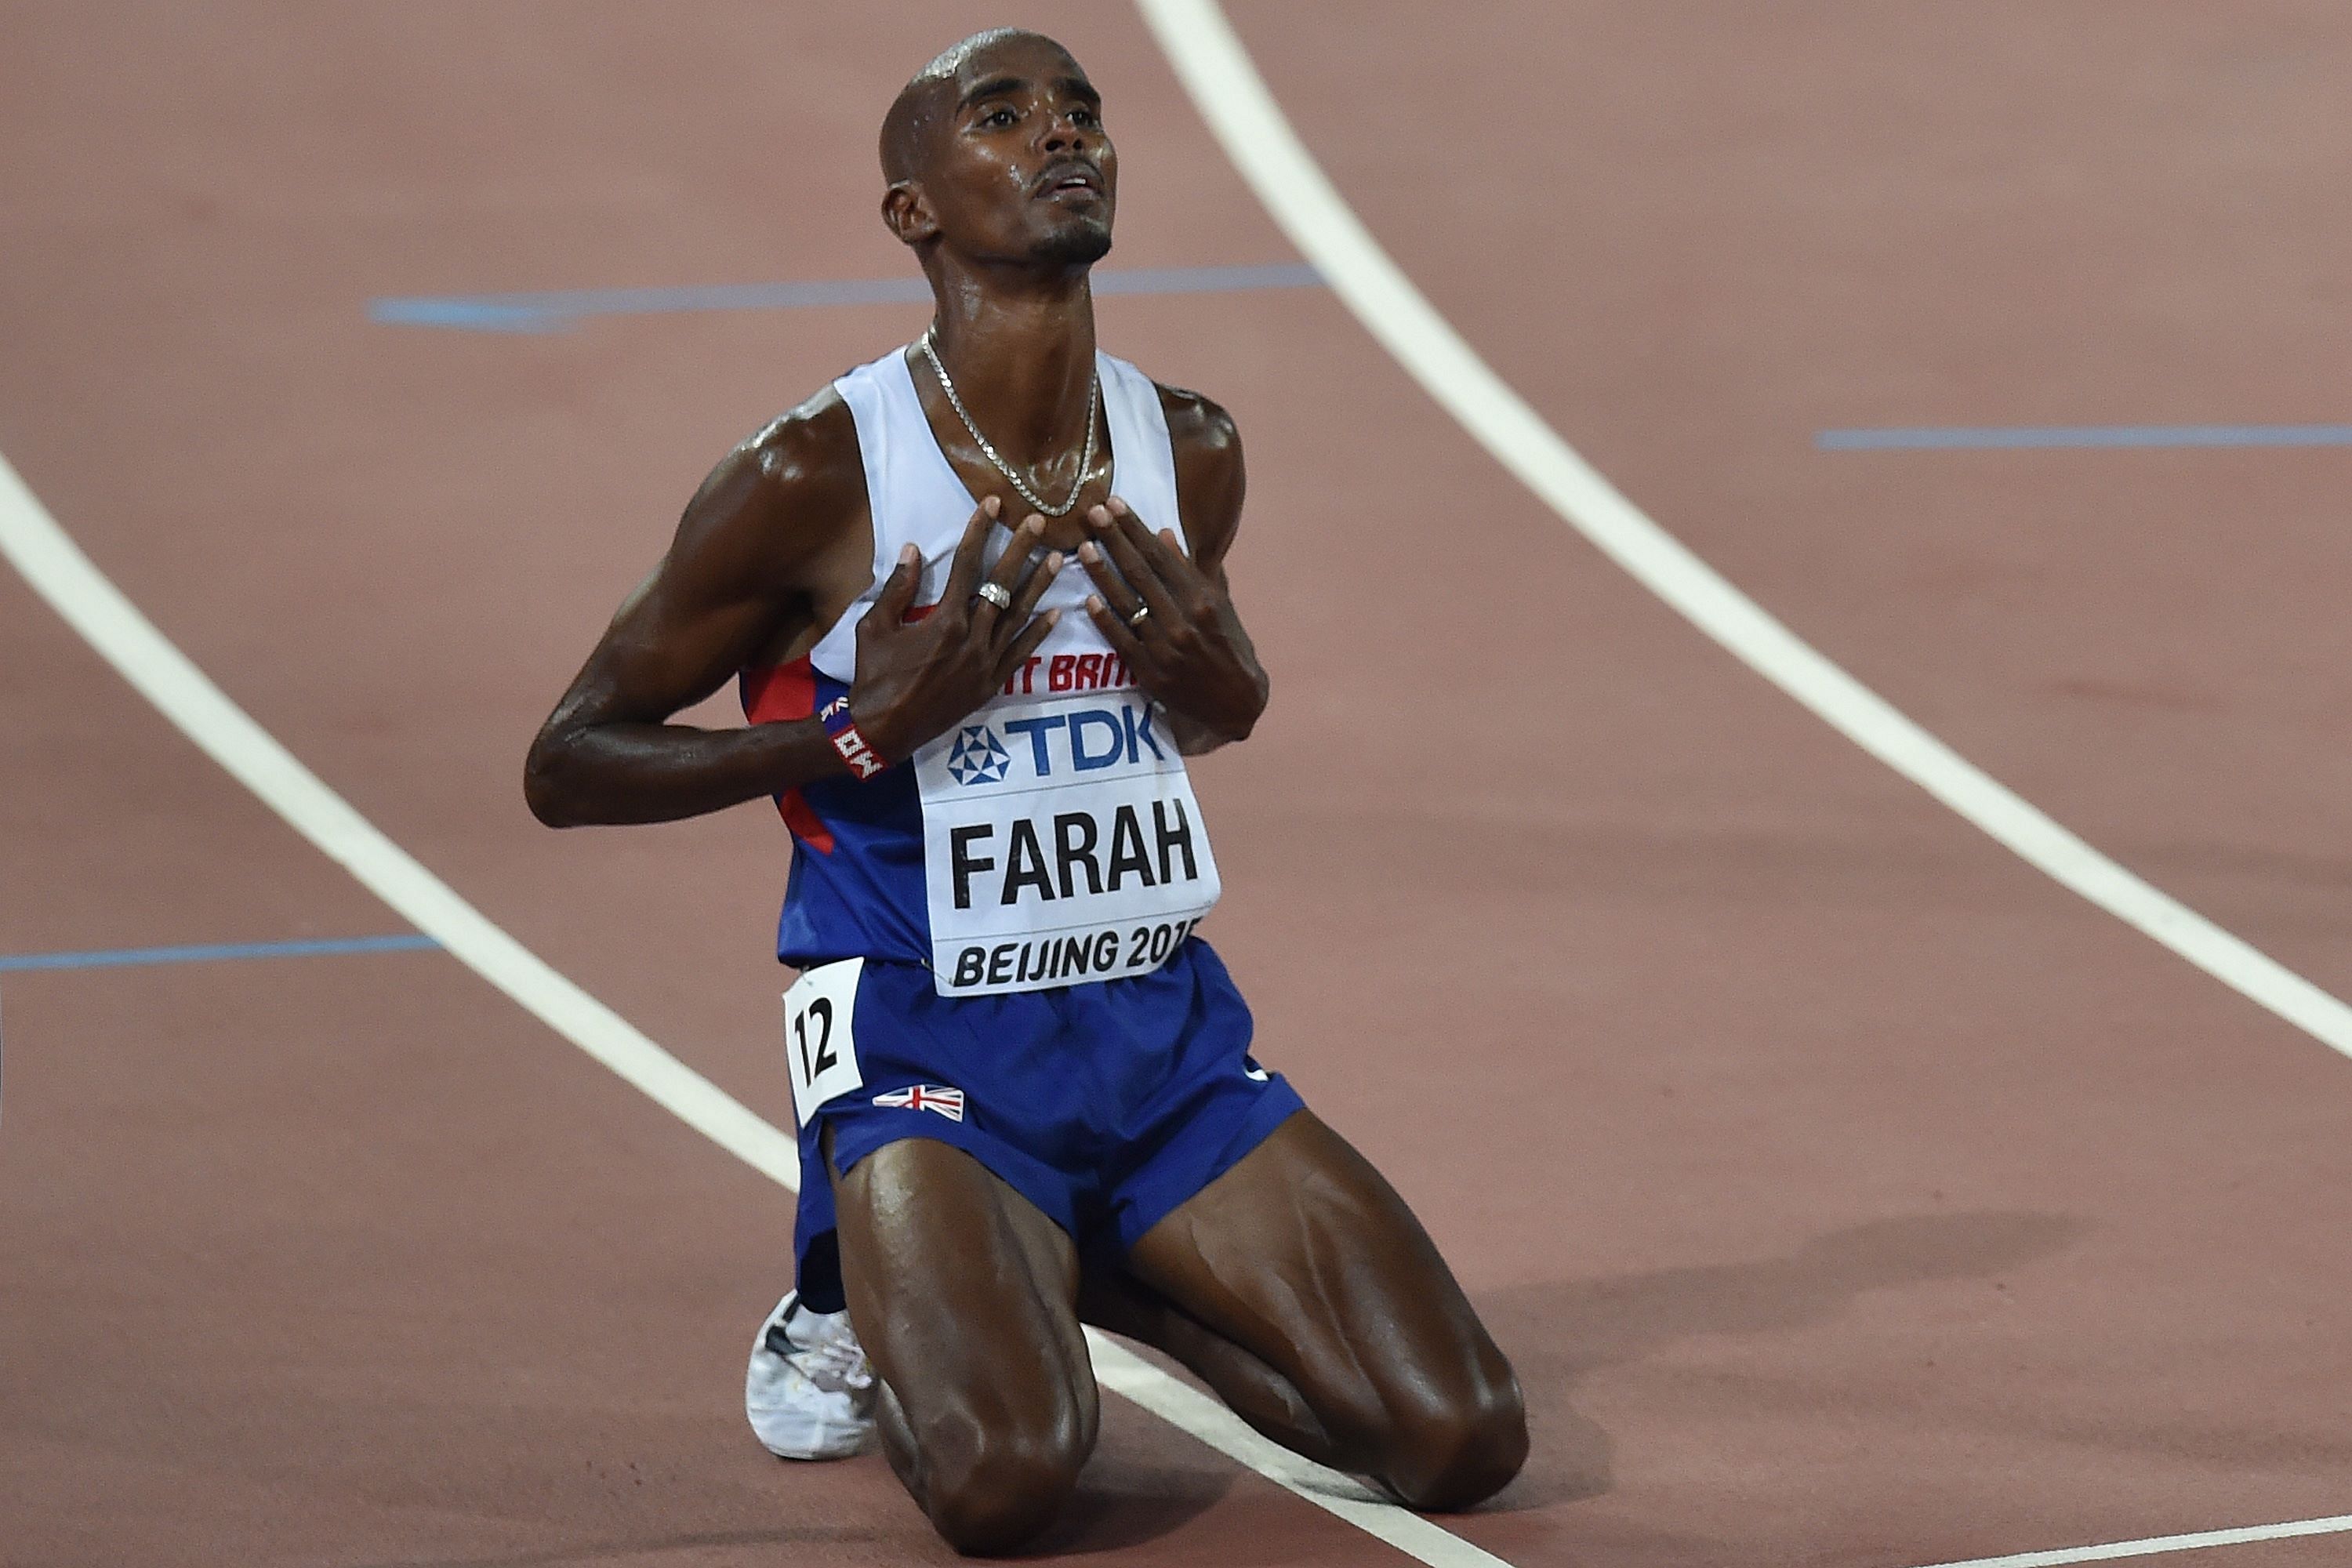 End Of The Track For Mohamed Farah After 5000m Silver | Saxafi Media